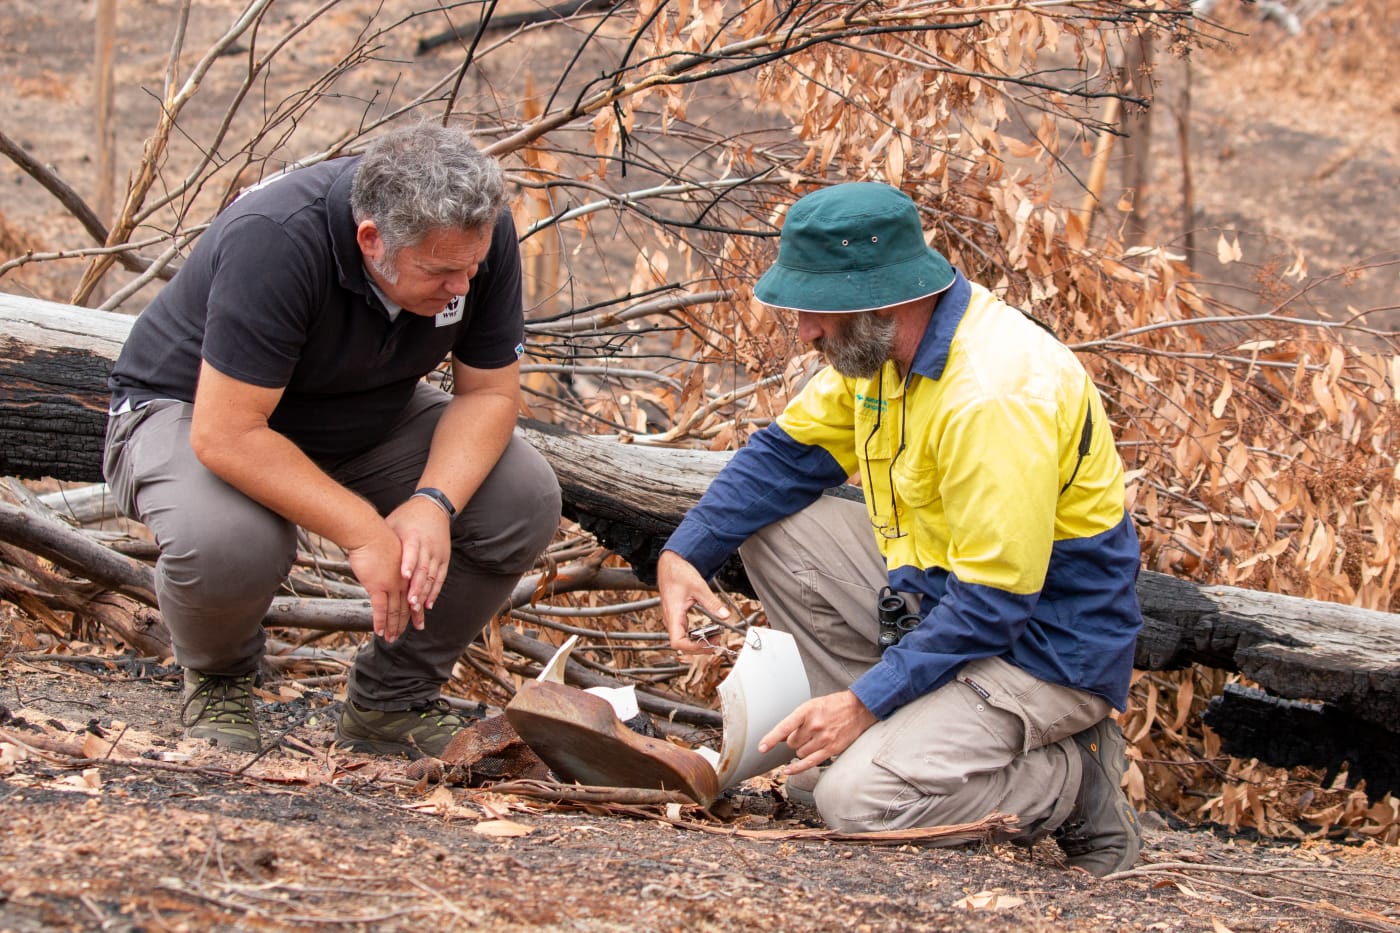 Darren Grover from WWF-Australia and Mike Barth from Natural Resources Kangaroo Island inspect a nest box destroyed by fires in Lathami Conservation Park on Kangaroo Island